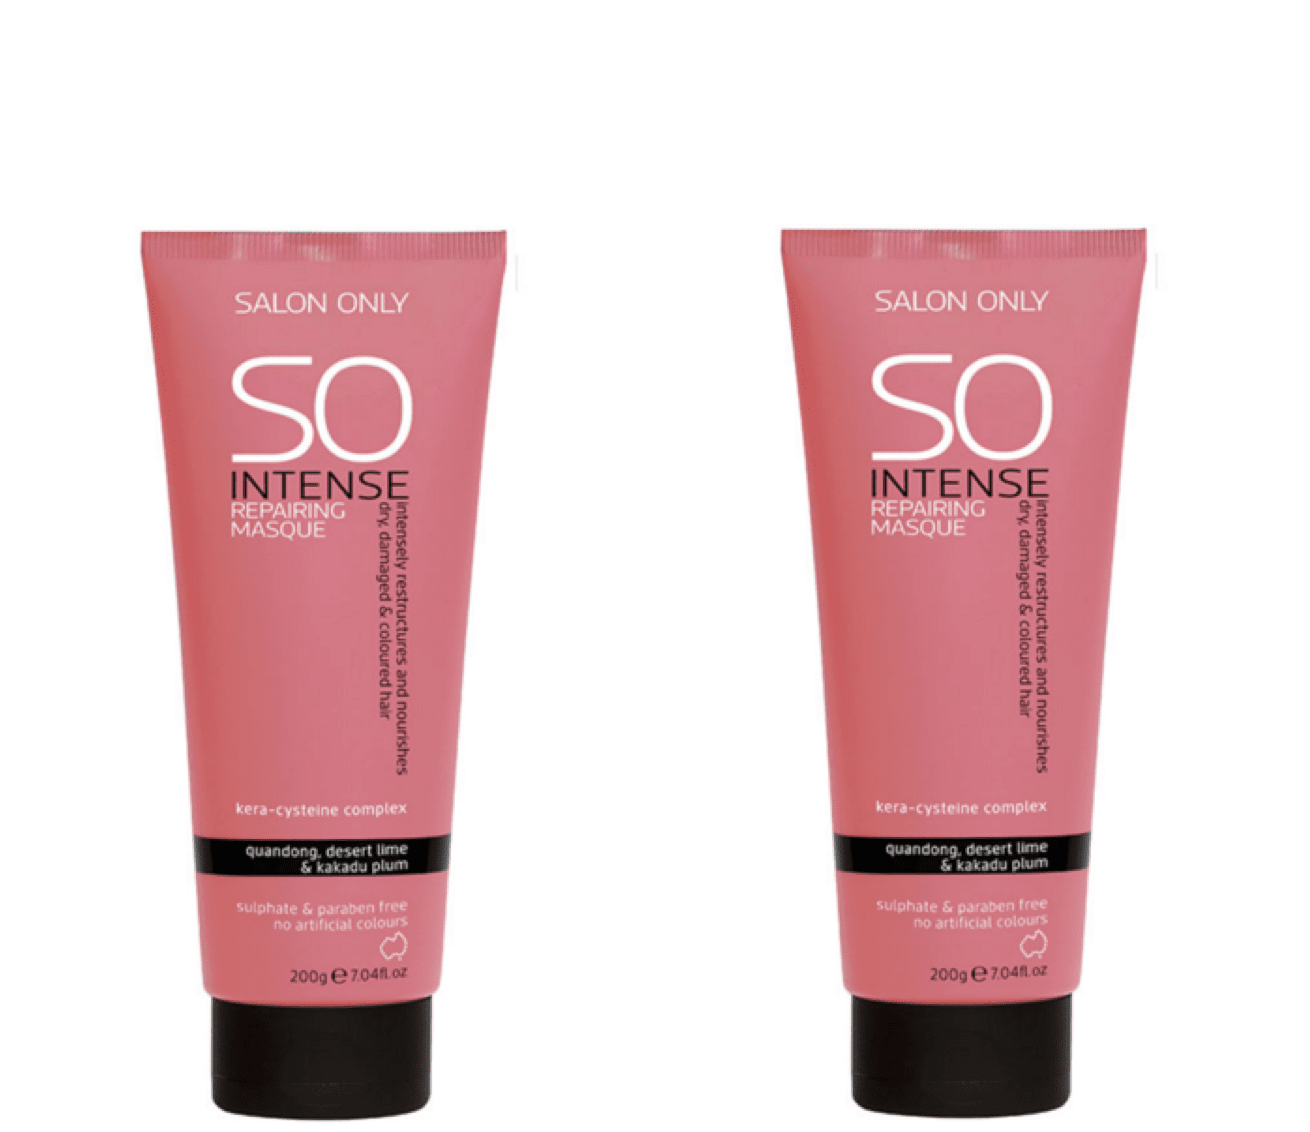 Salon Only Intense Repairing Masque 200g x 2 Duo Pack